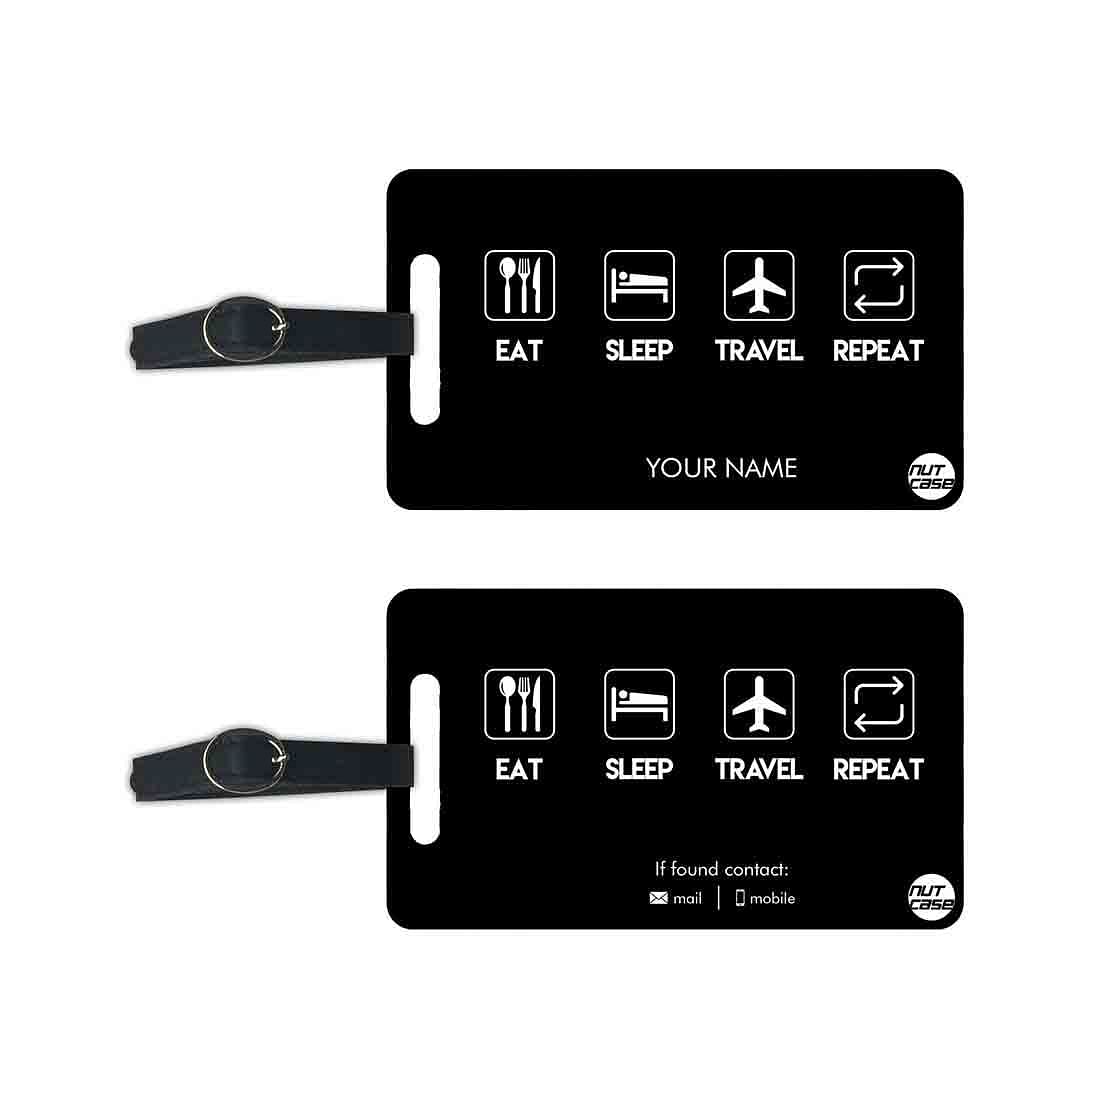 Customized Printed Luggage Tags - Add your Name - Set of 2 Nutcase